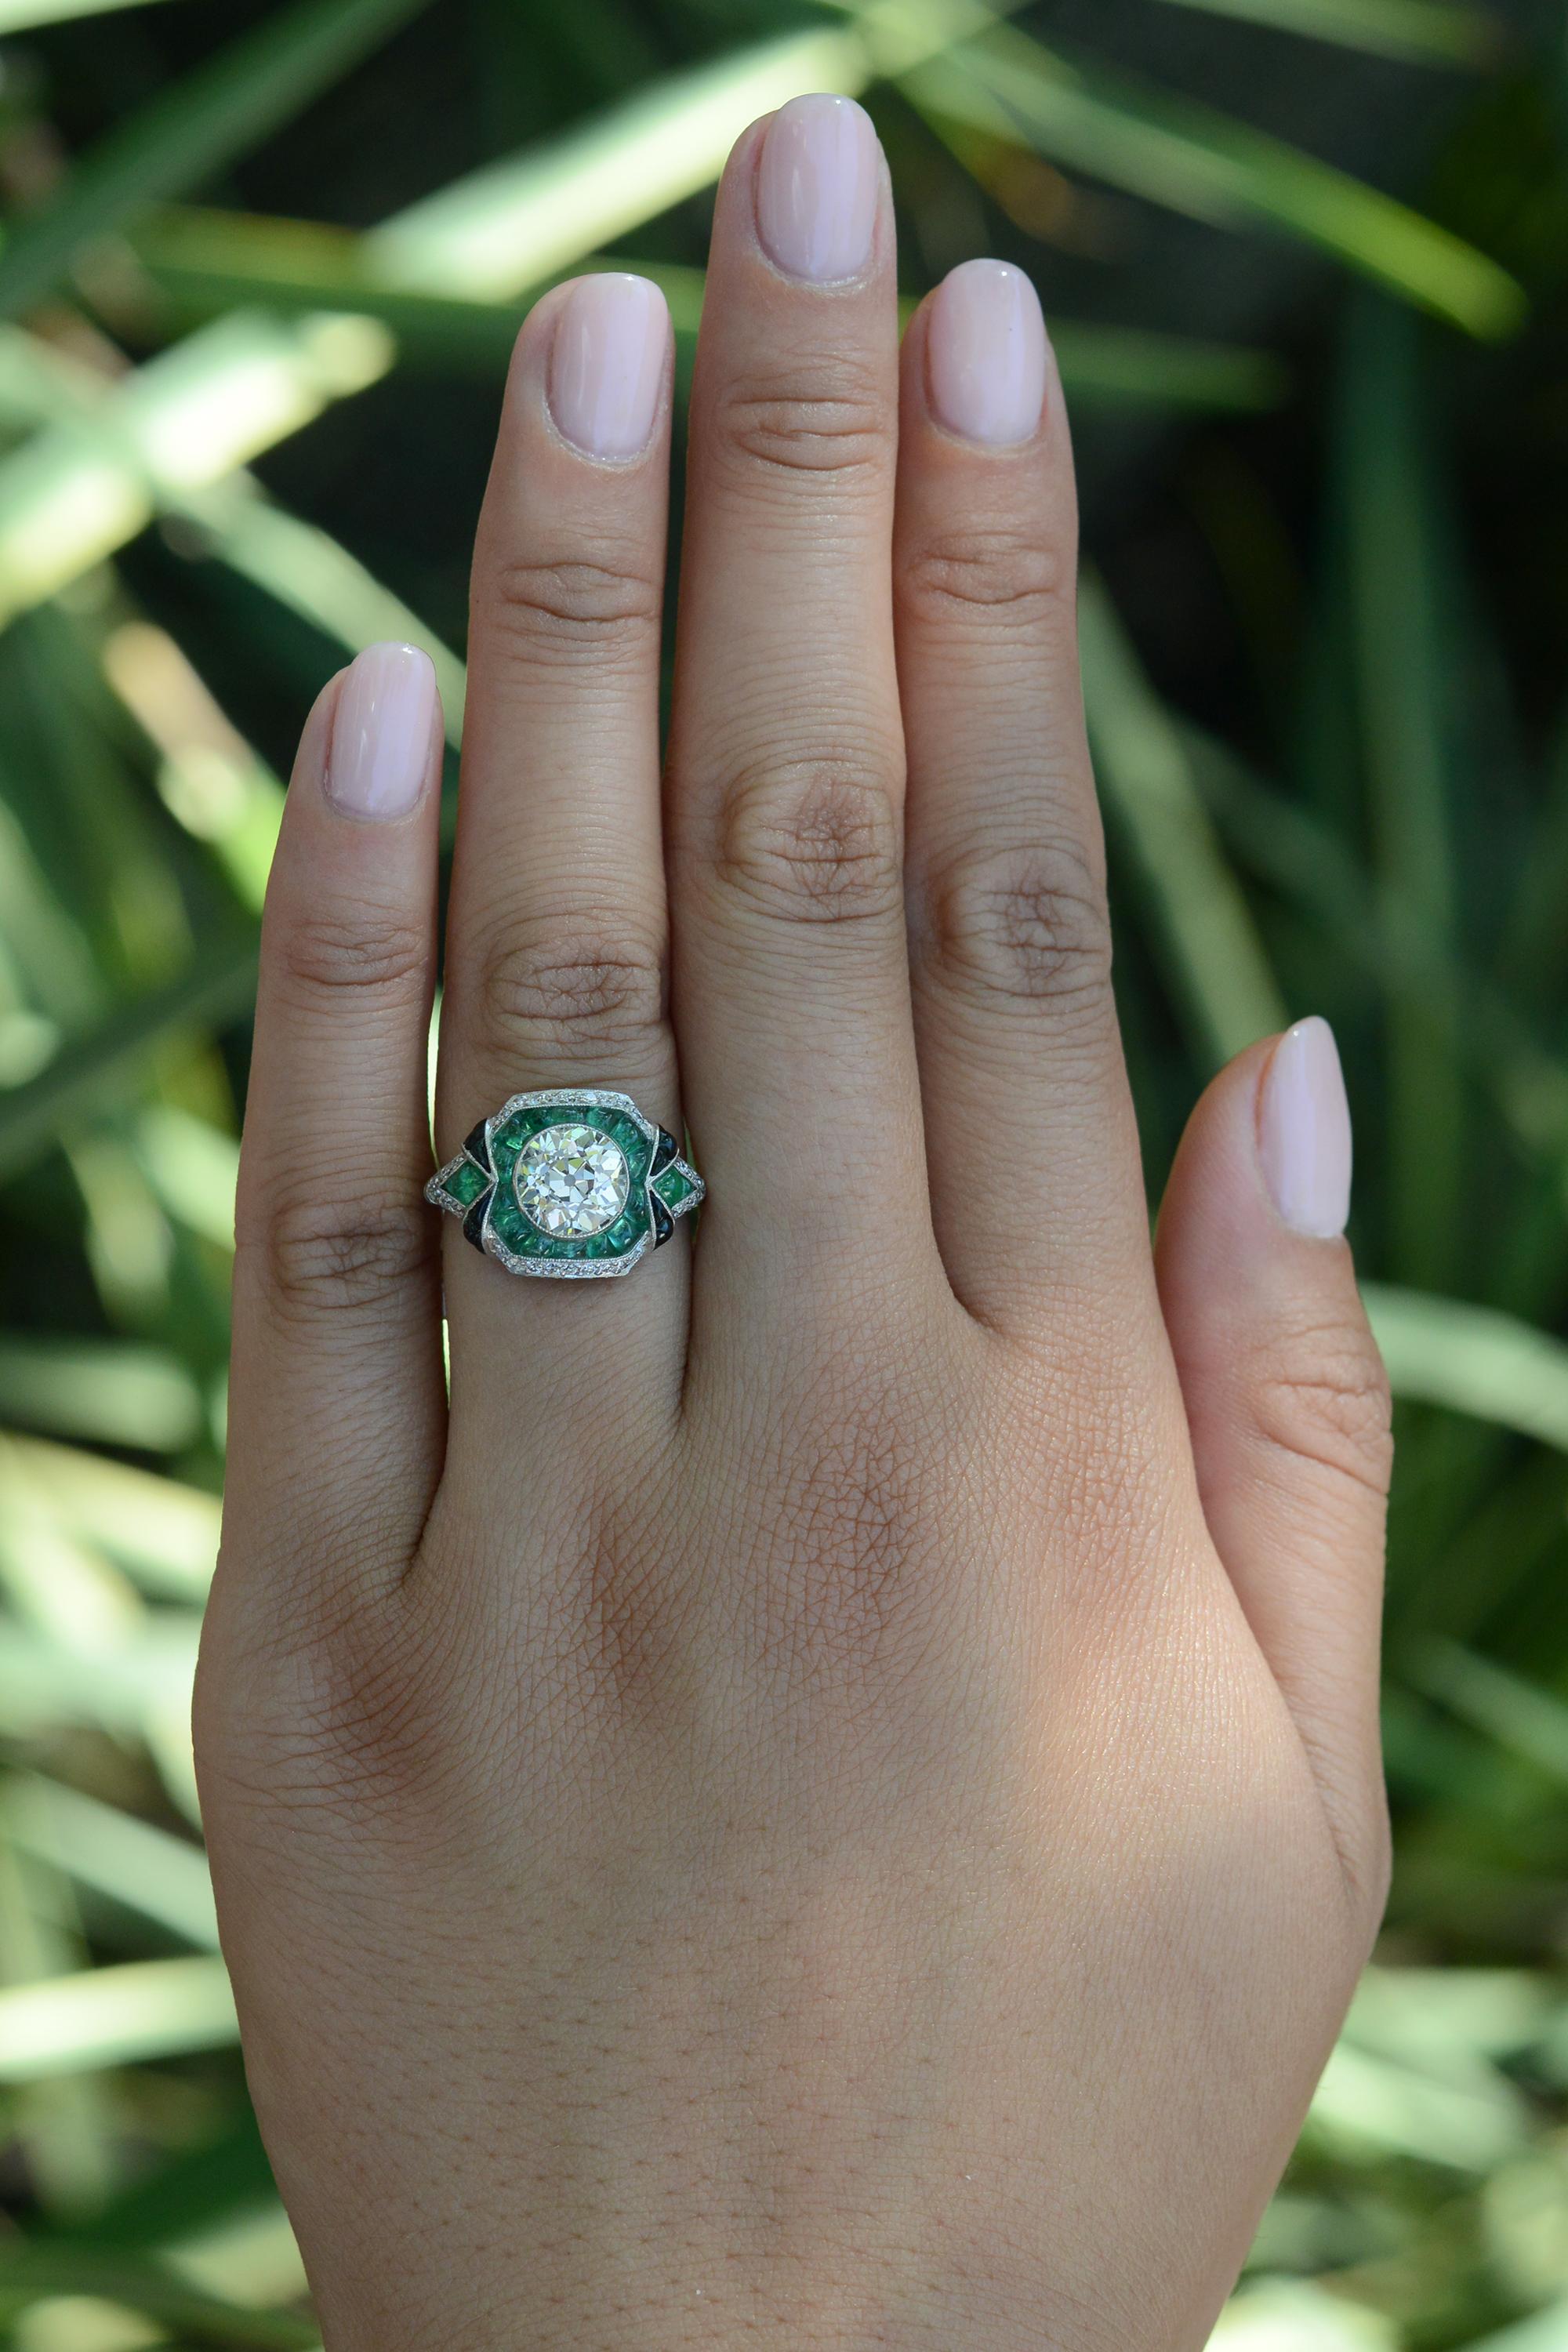 This sensational Art Deco inspired engagement ring has a trio of gemstones that have come to be our favorite combination; diamond, emerald, and onyx. There is something so special about the way the dazzling antique diamond contrasts with the mystic